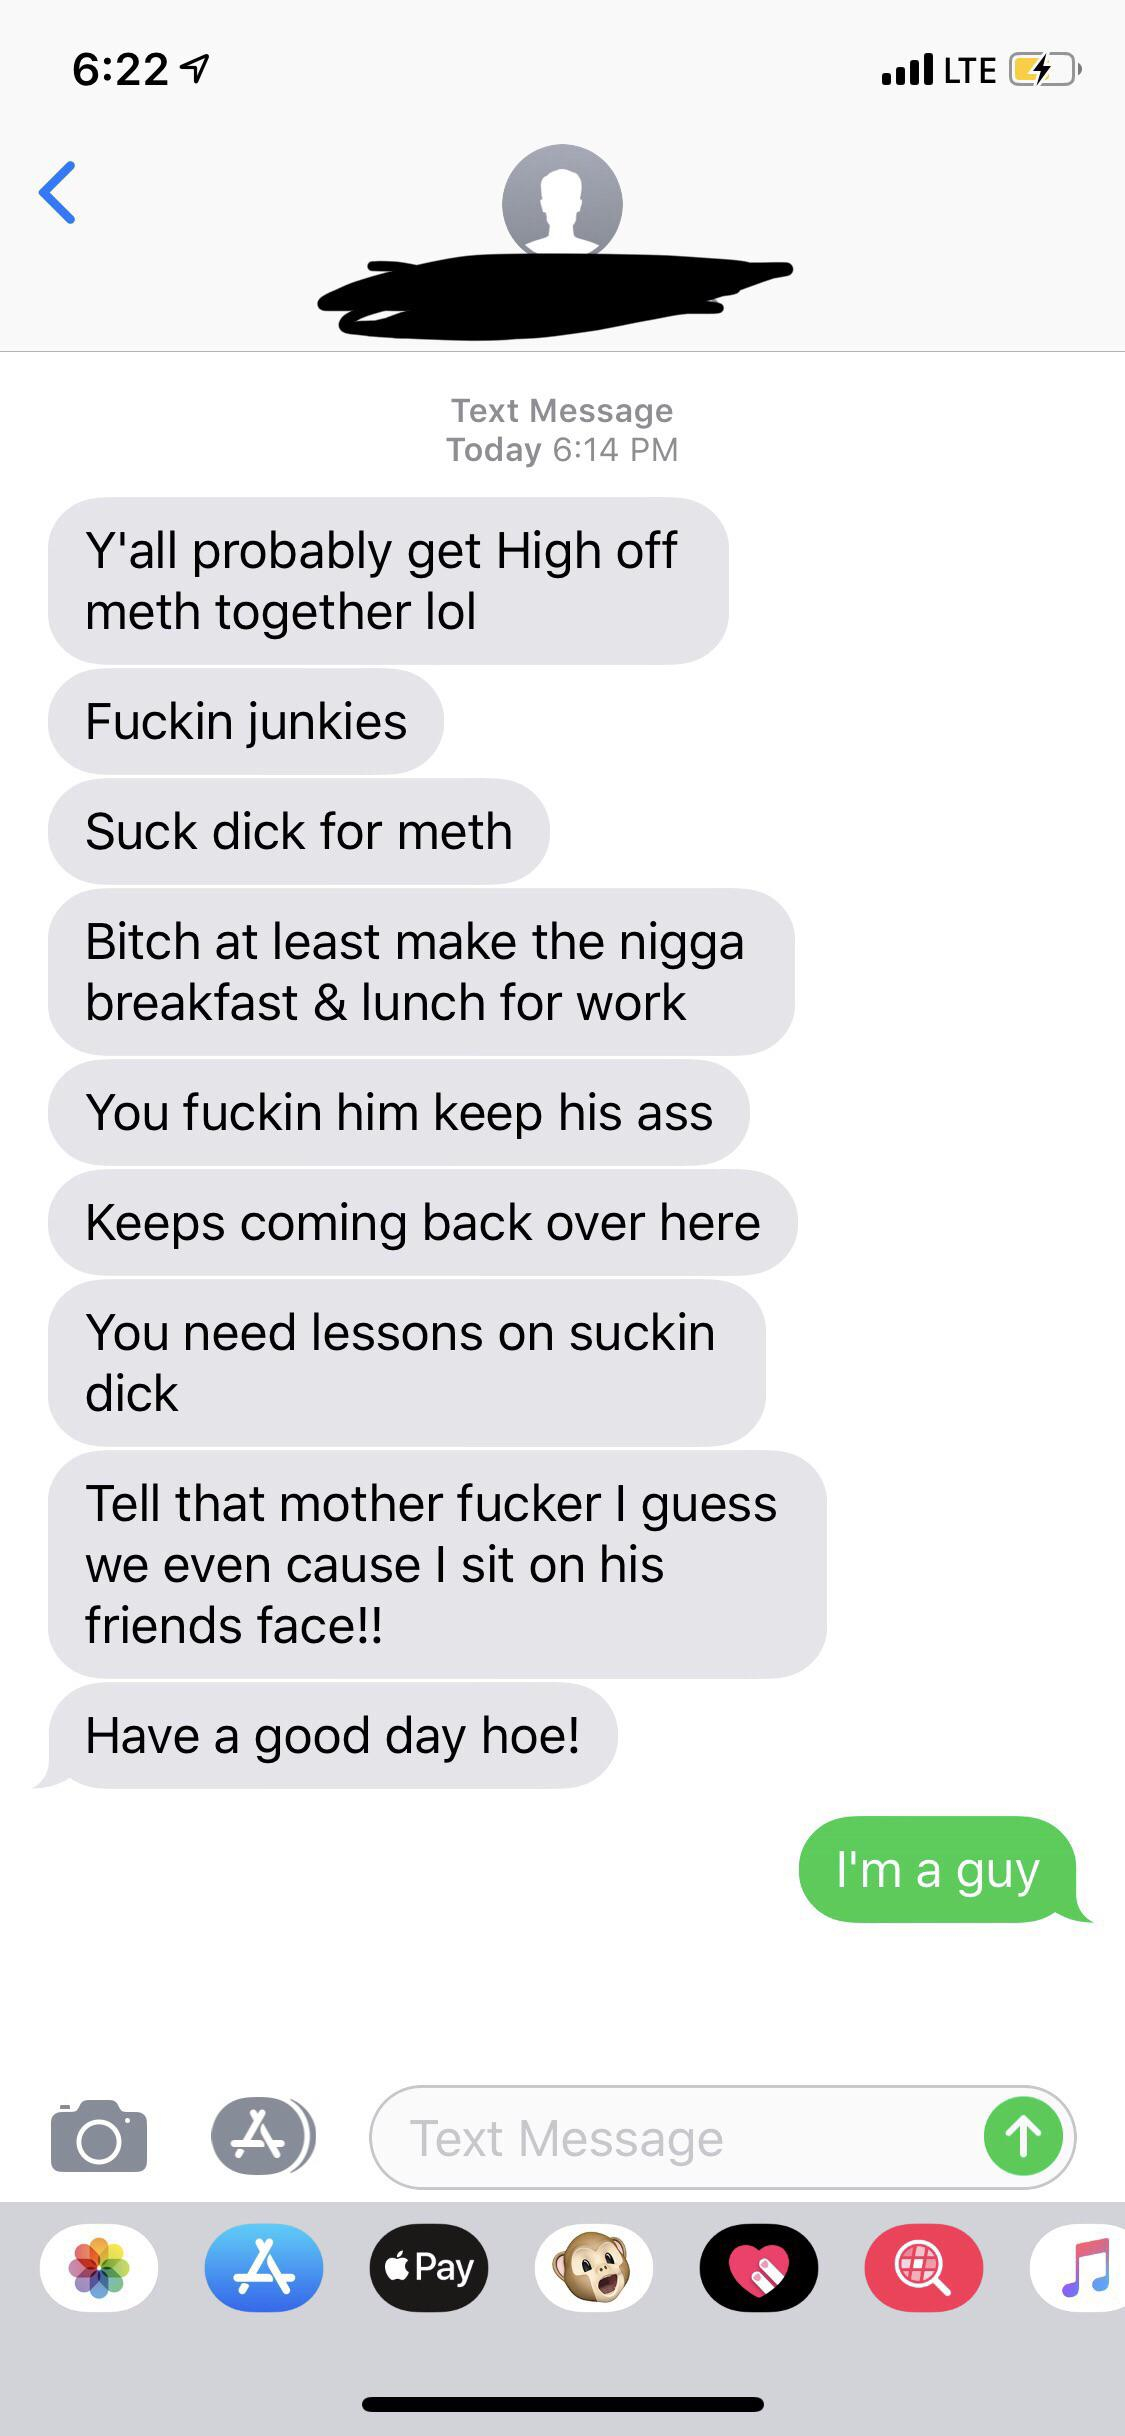 break up with your girlfriend lyric prank - ..| Lte C Text Message Today Y'all probably get High off meth together lol Fuckin junkies Suck dick for meth Bitch at least make the nigga breakfast & lunch for work You fuckin him keep his ass Keeps coming back